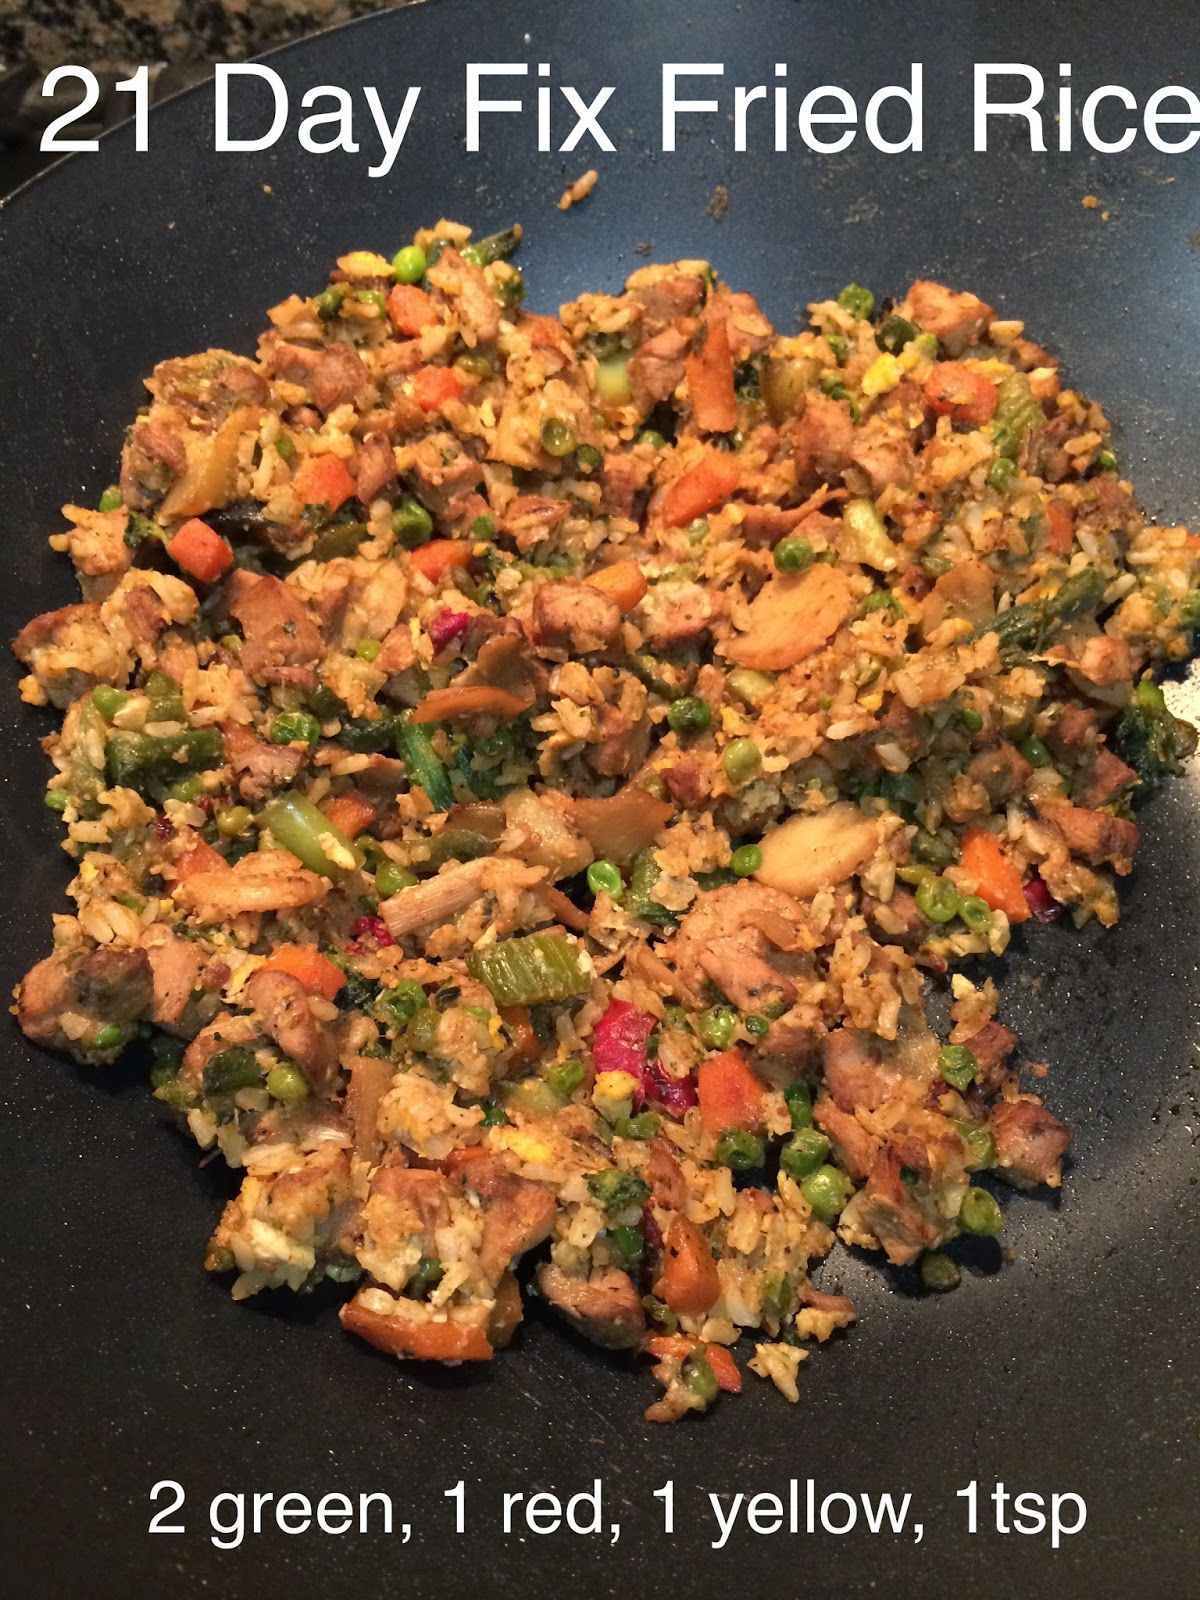 The Fit Life: 21 Day Fix Days11-13 & Recipe: Fried Rice